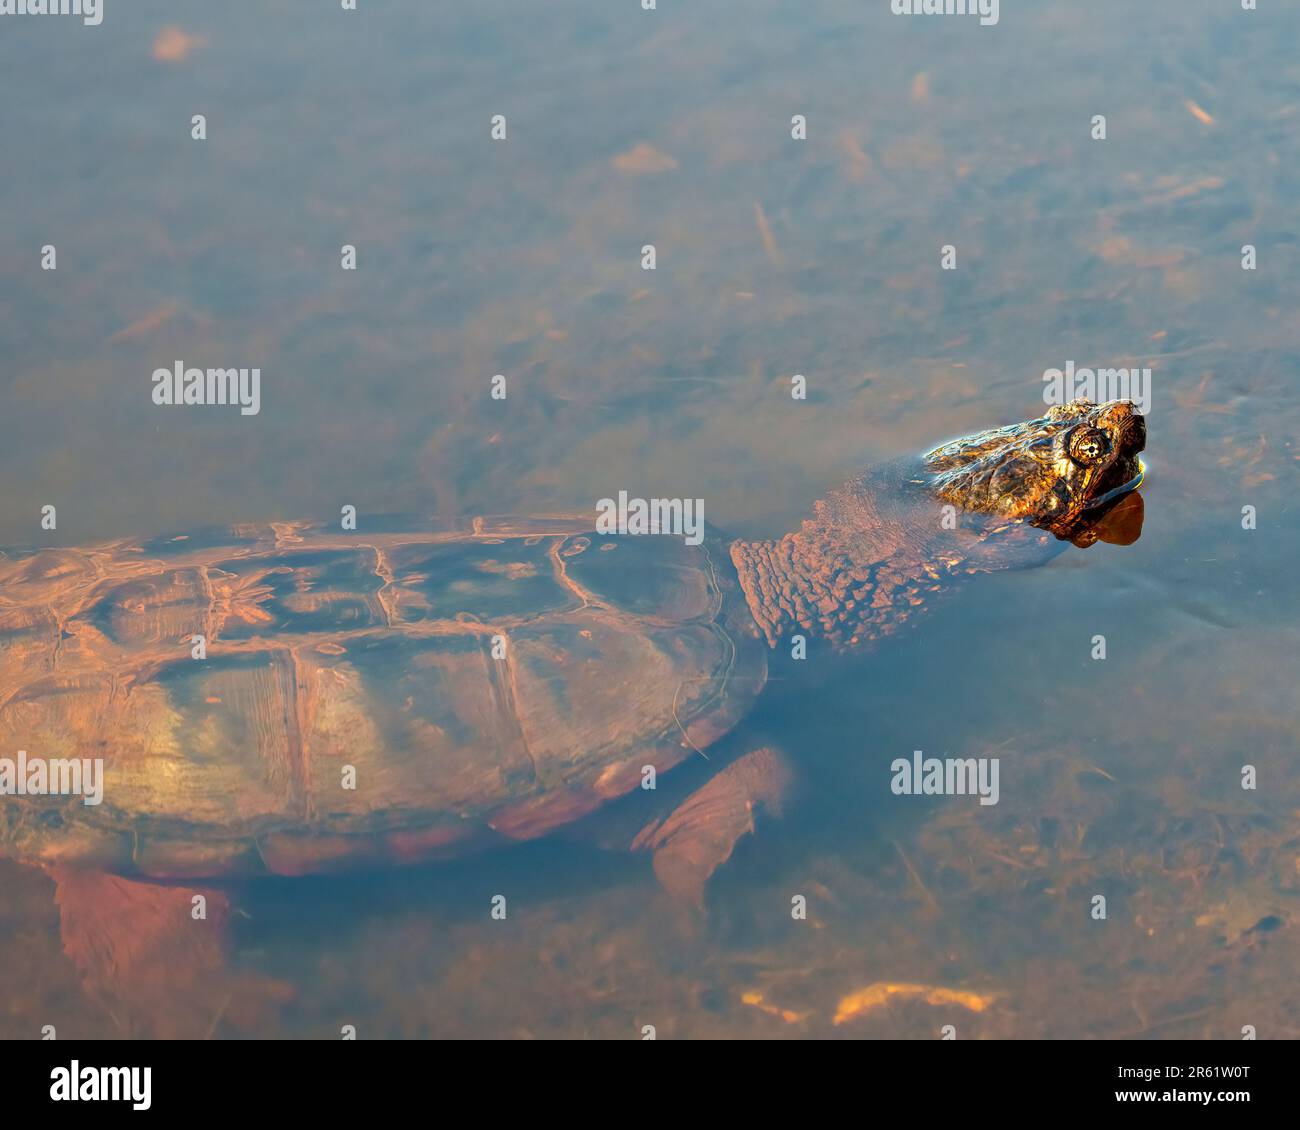 Snapping Turtle in the foggy water displaying long neck, head, turtle shell, paws in its environment and habitat surrounding. Stock Photo